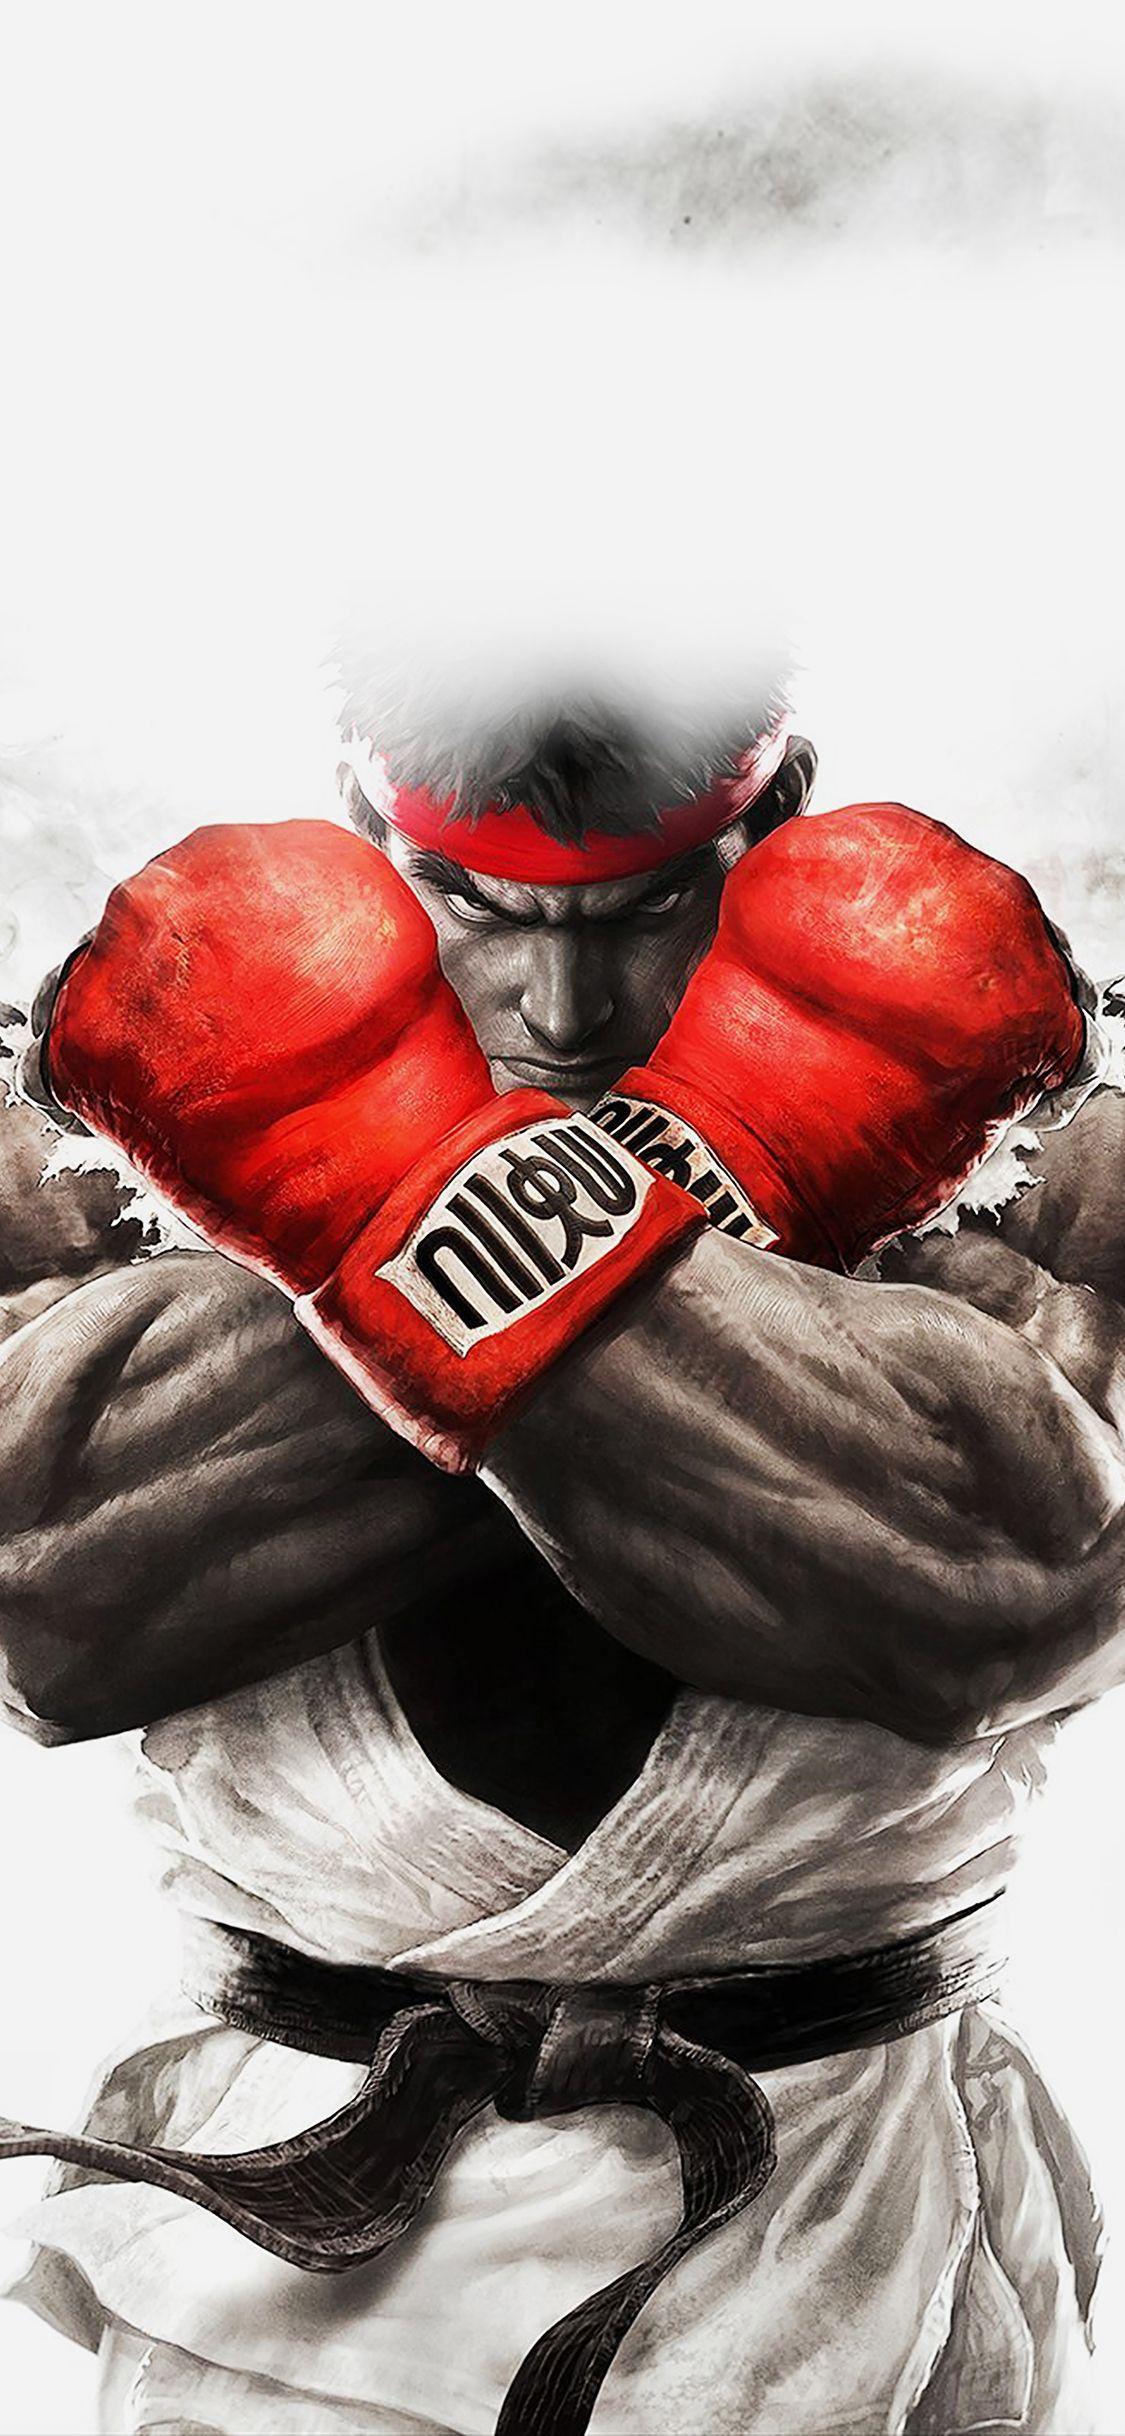 Street Fighter Iphone Wallpapers Top Free Street Fighter Iphone Backgrounds Wallpaperaccess